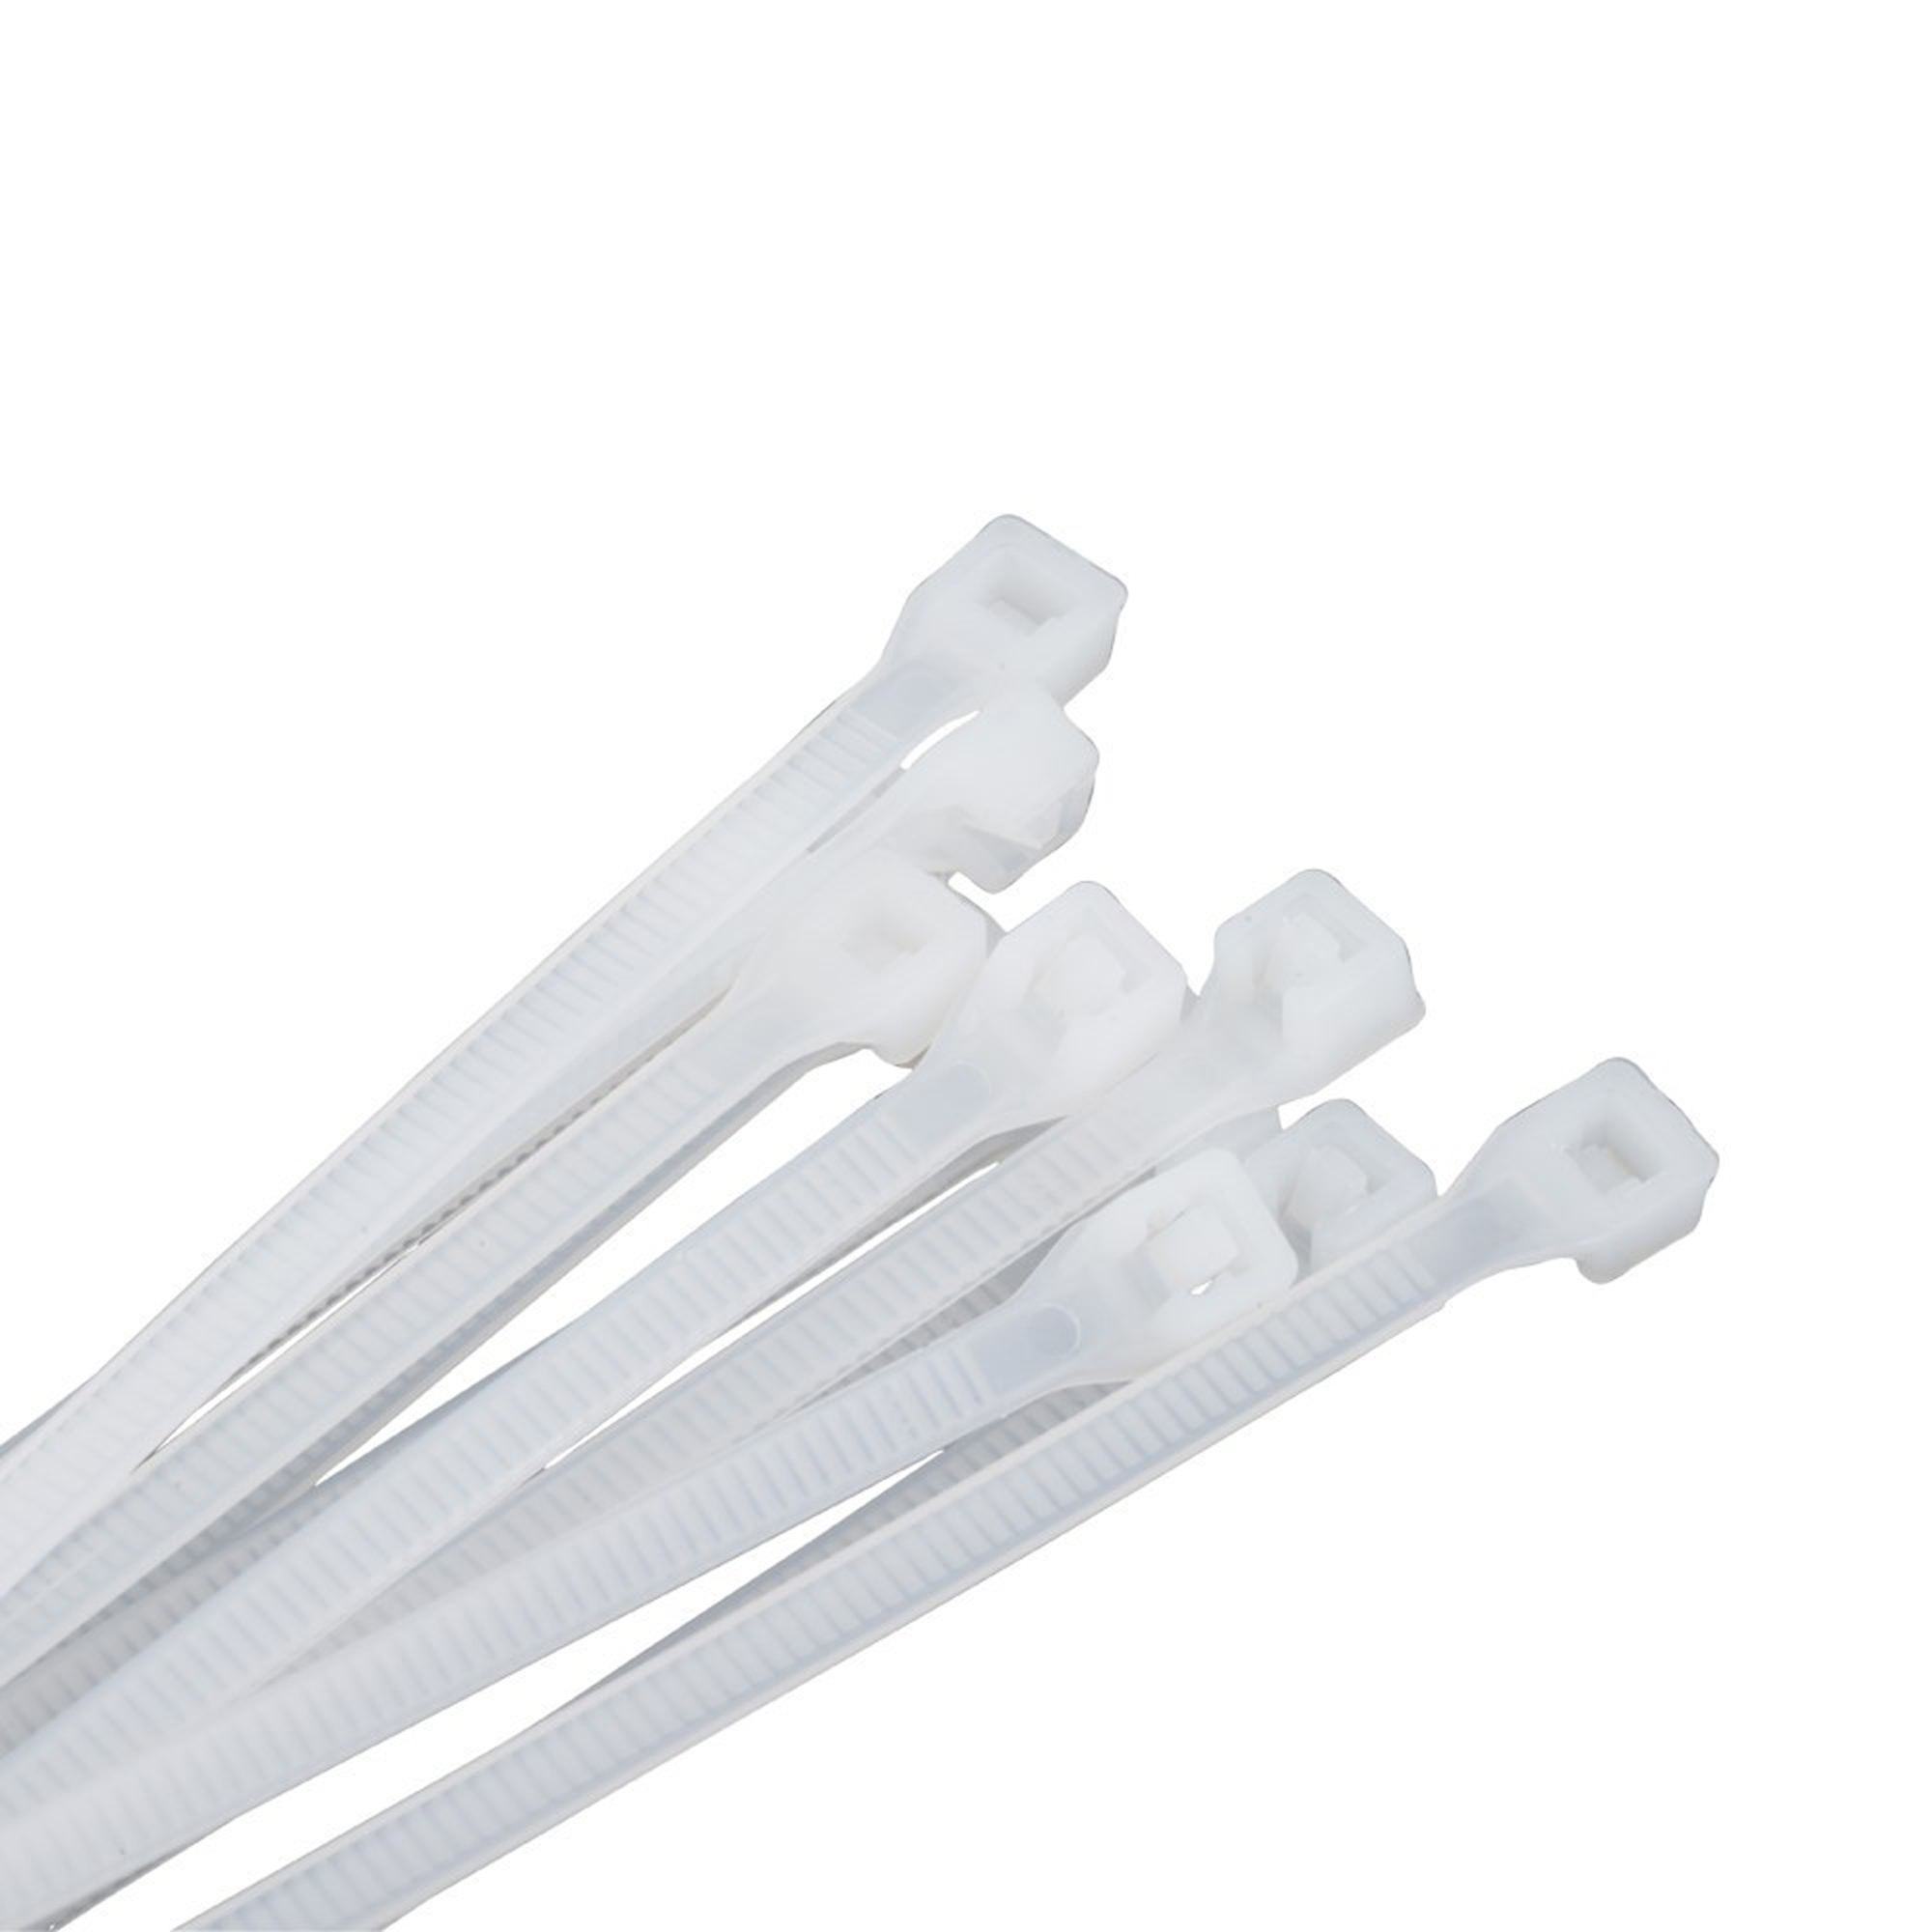 Cable Ties White 1500 mm (Individual)